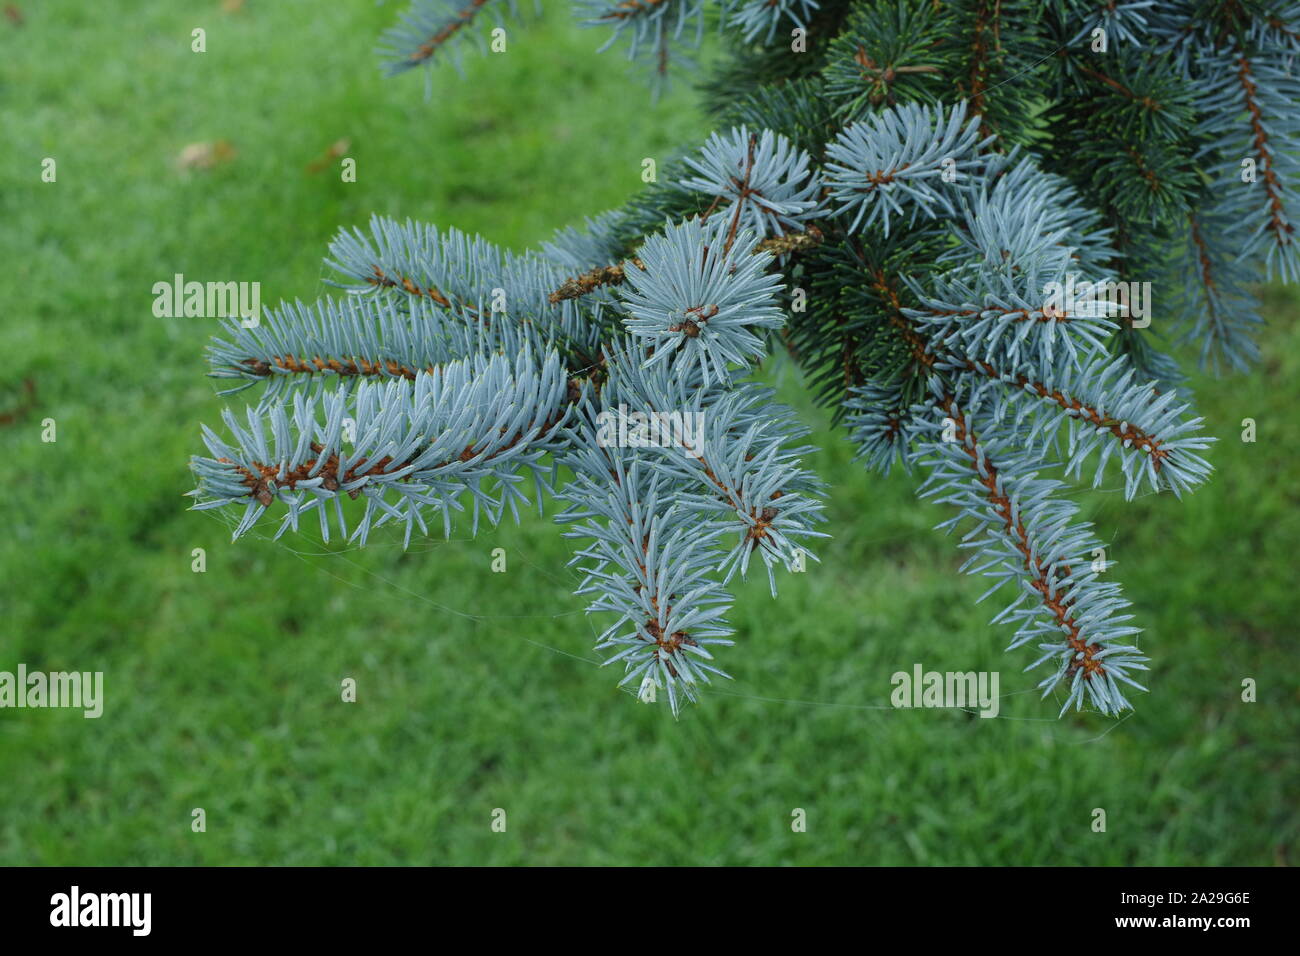 Blue Spruce, Colorado Spruce (Picea pungens). Close Up Macro of the pine Needles on a Misty Winters Day. Exeter, Devon, UK. Stock Photo